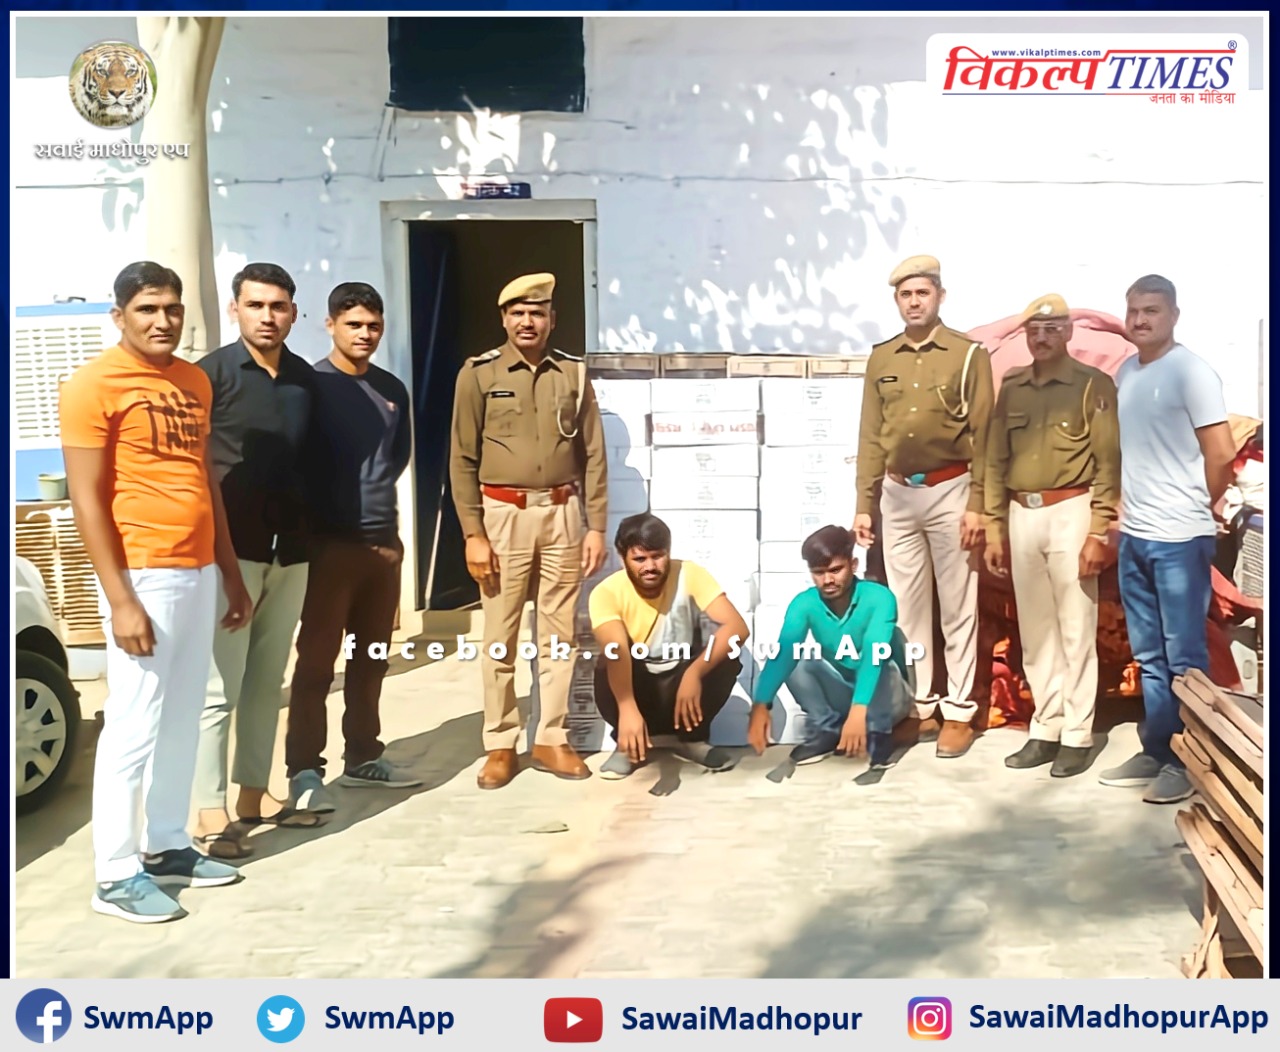 Police Arrested two people including illegal 1339 liters of liquor from tempo in khandar Sawai Madhopur